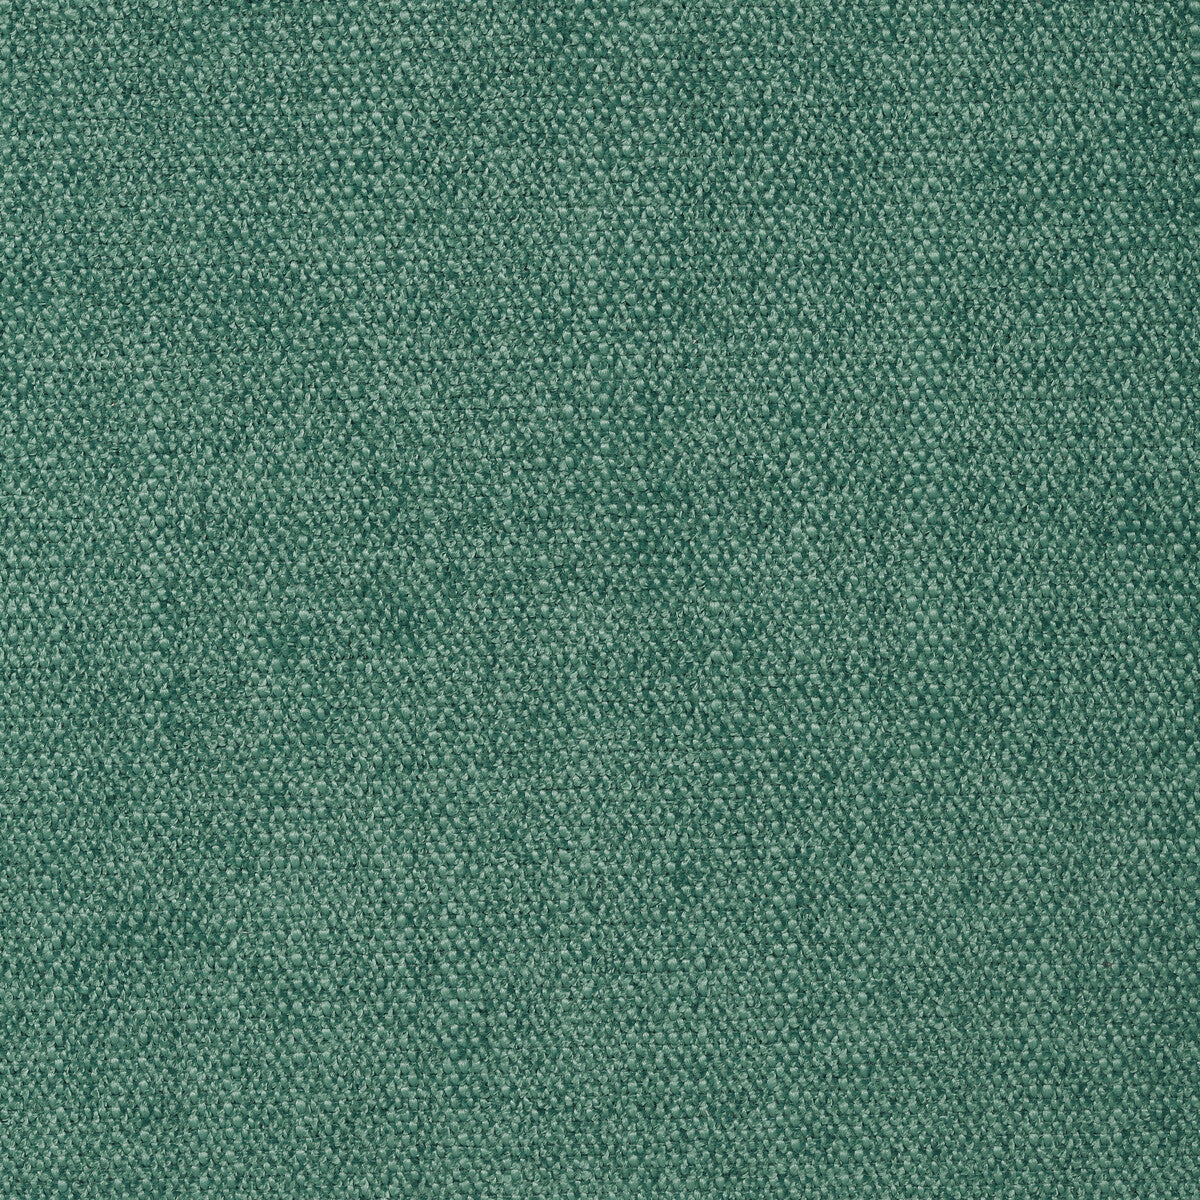 Kravet Smart fabric in 35113-35 color - pattern 35113.35.0 - by Kravet Smart in the Performance Crypton Home collection